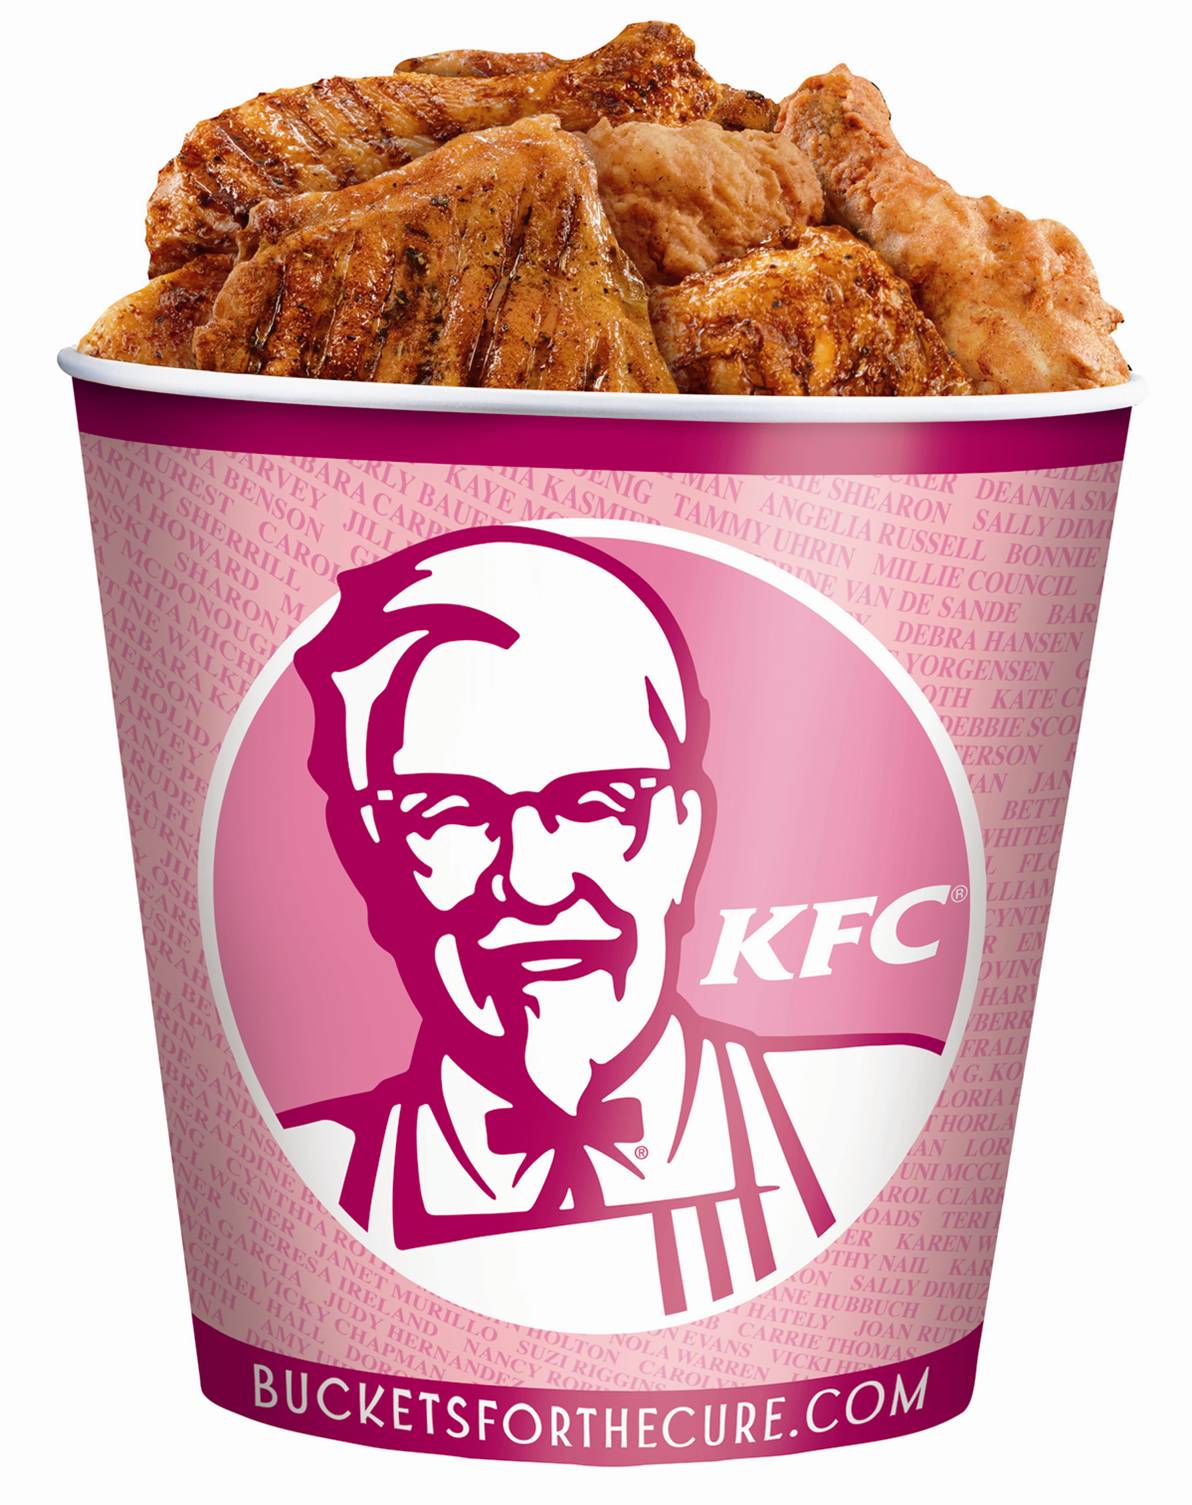 Fried Chicken: Used to Cure Cancer?